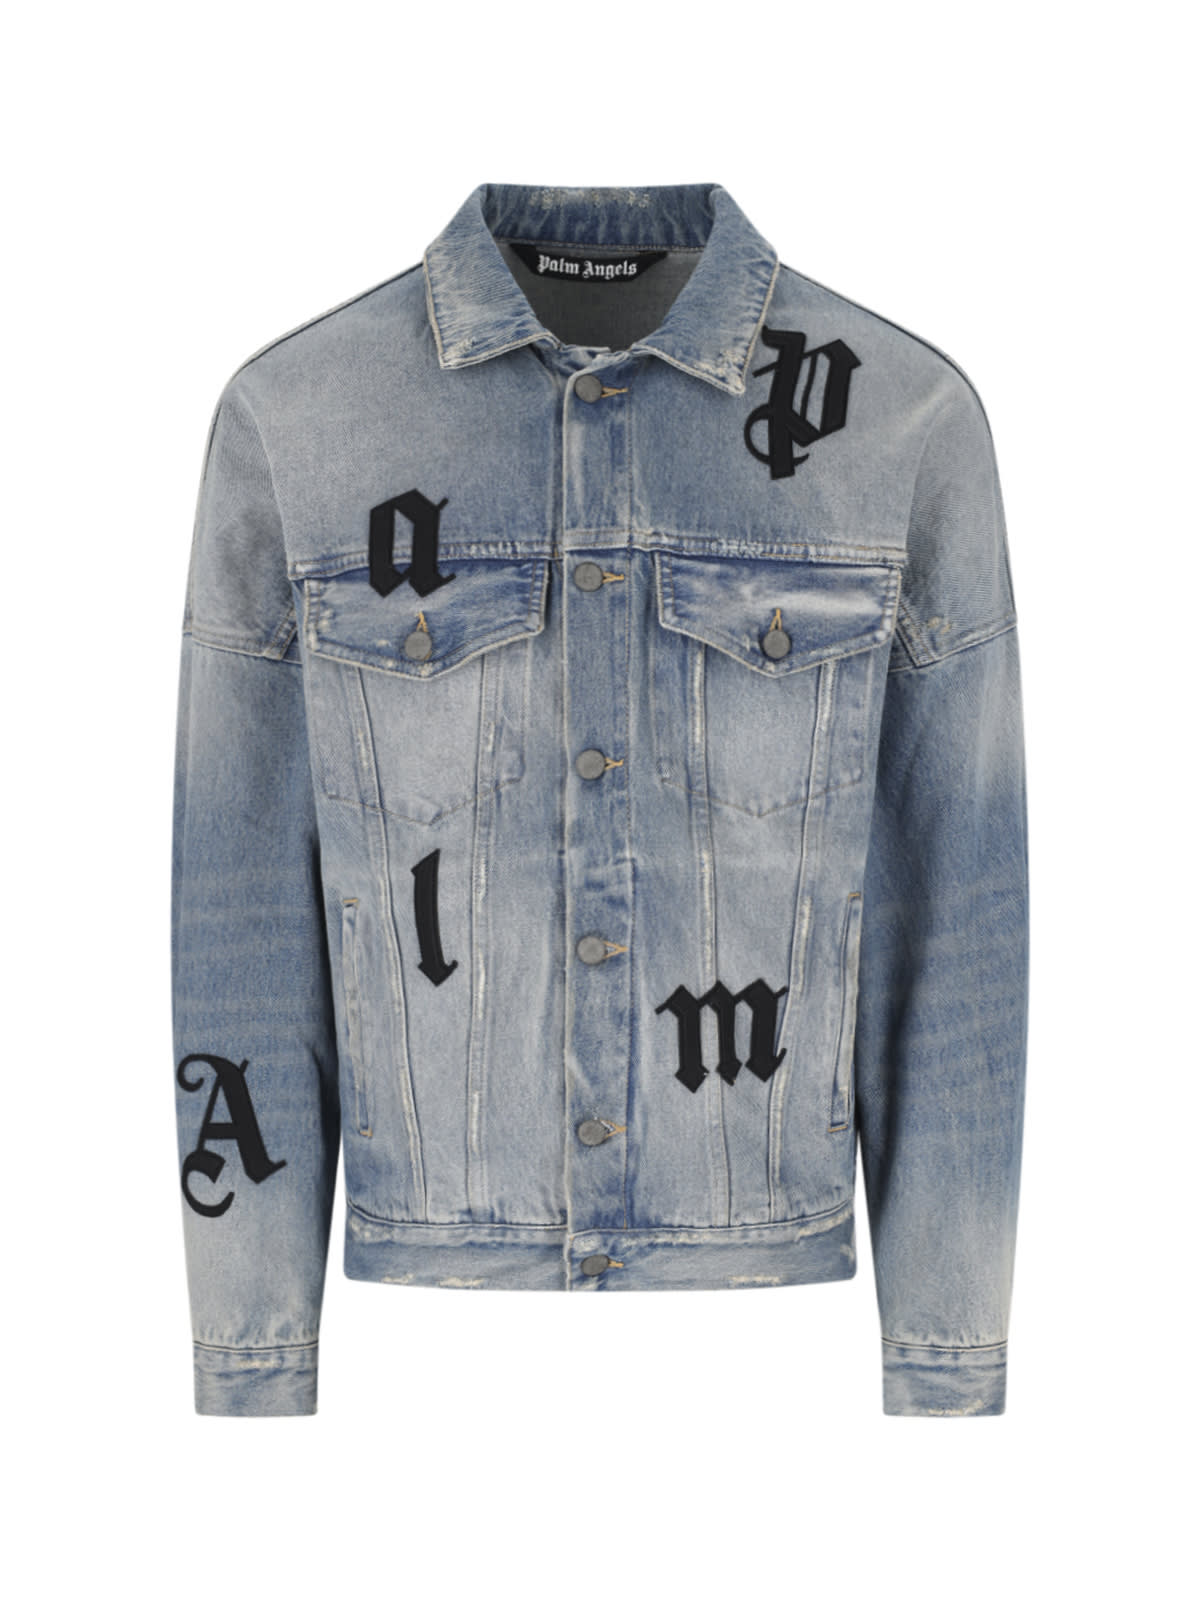 PALM ANGELS DENIM JACKET WITH PATCHES